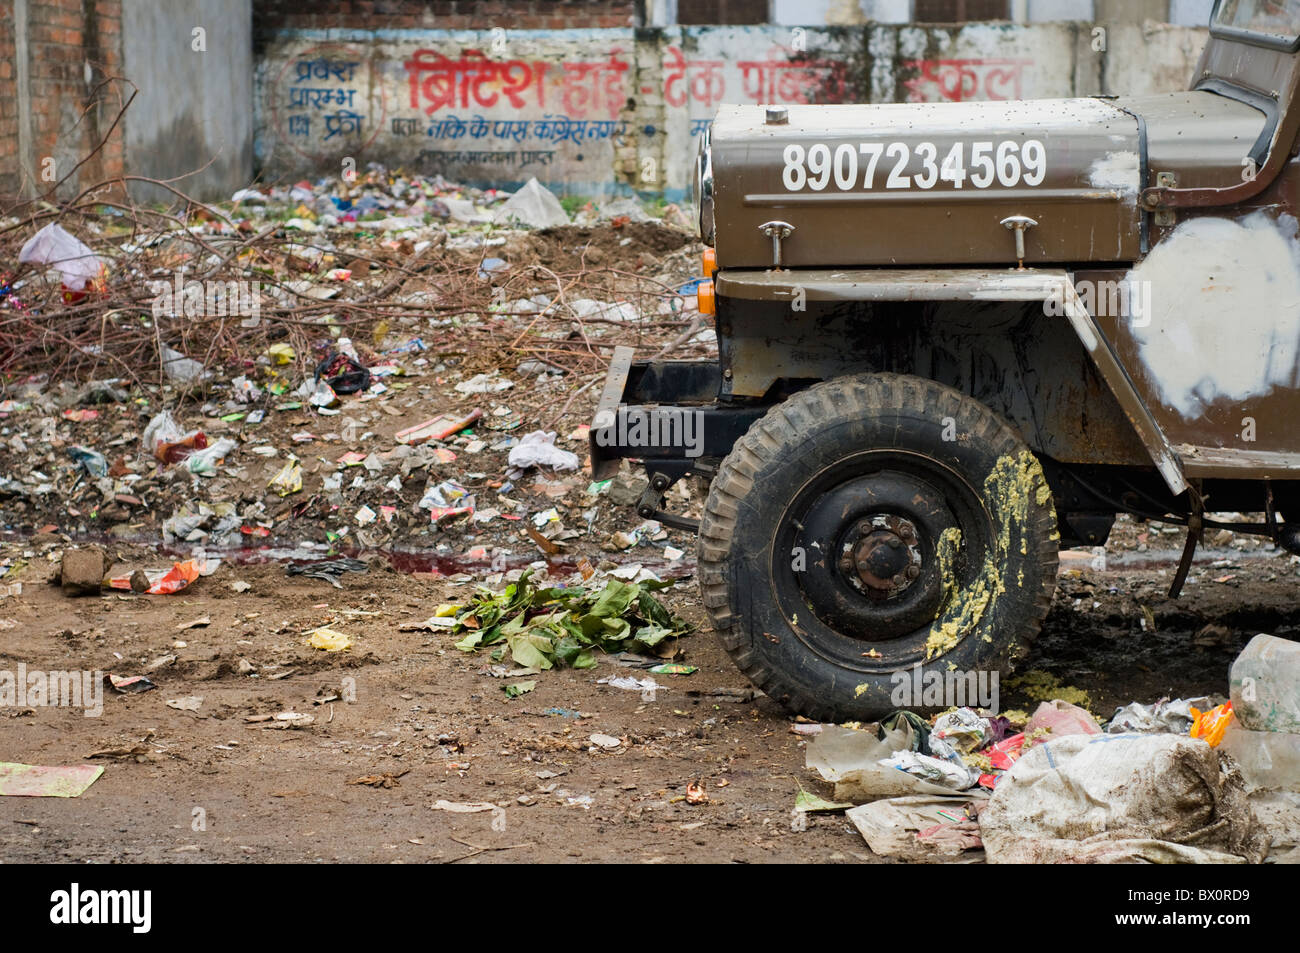 An abandoned jeep in a slum in the city of Bhopal, India Stock Photo